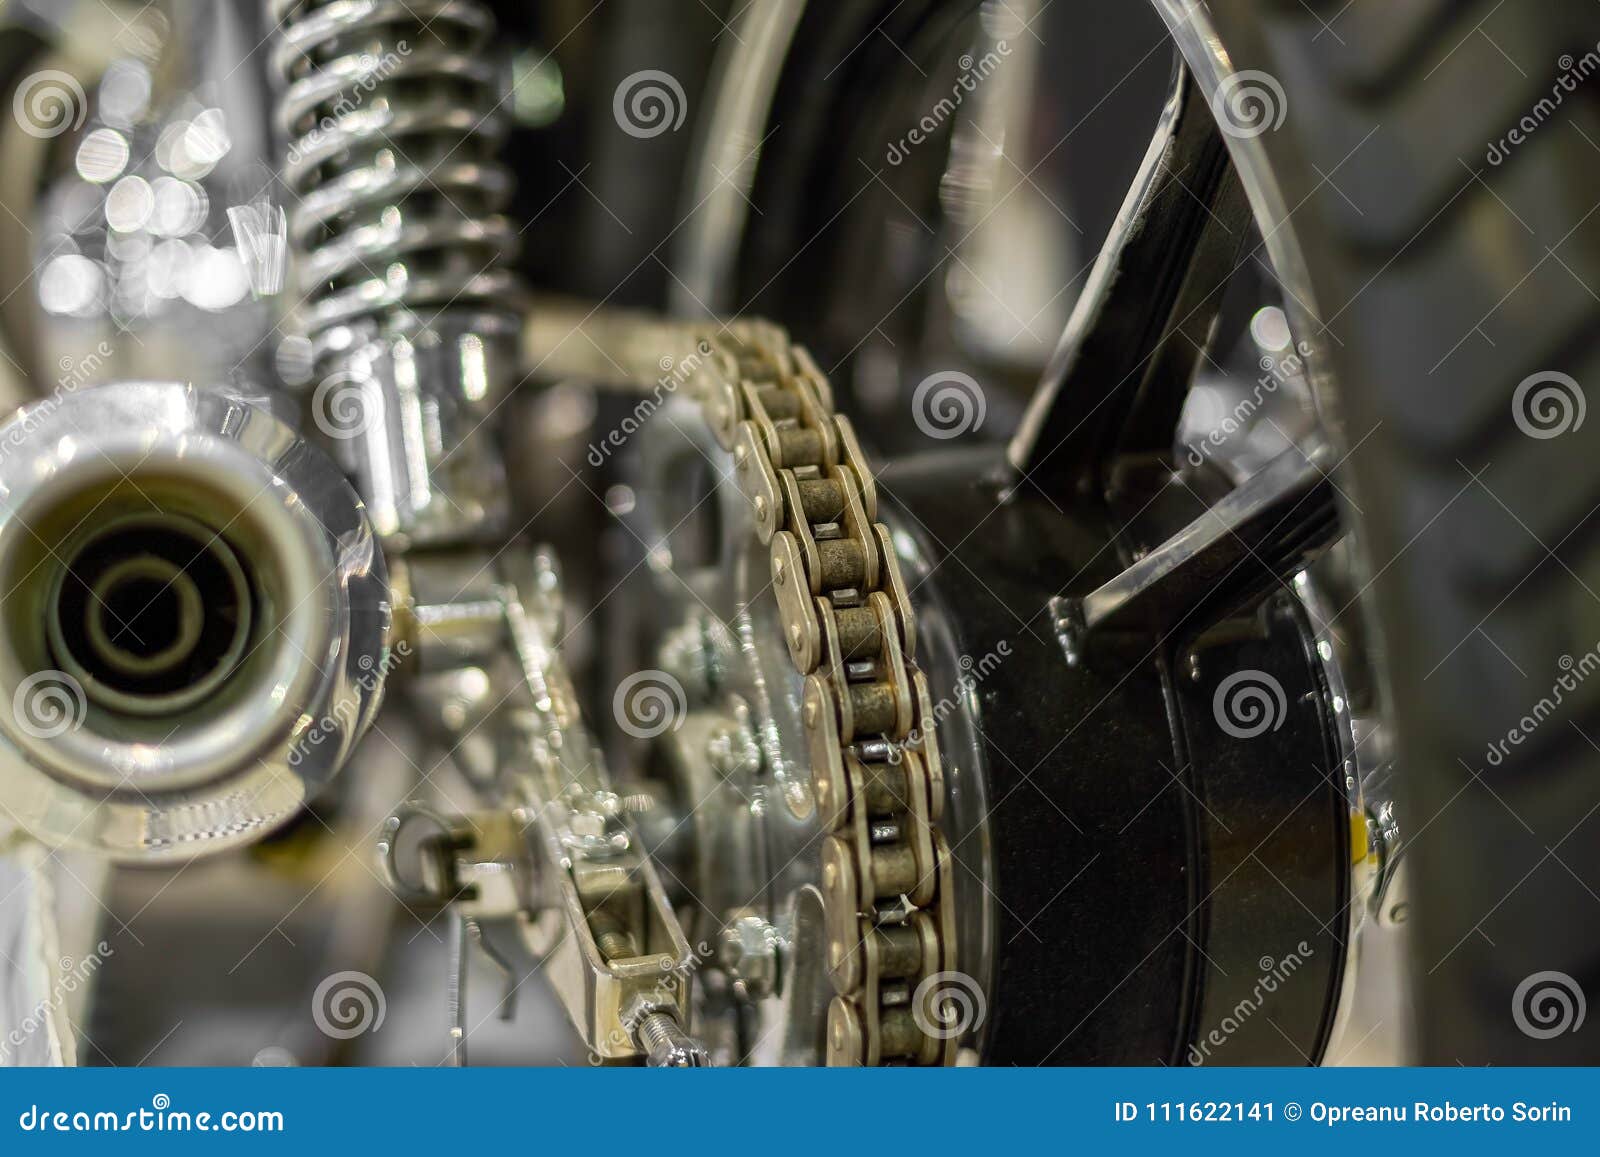 motorcycle chain transmision